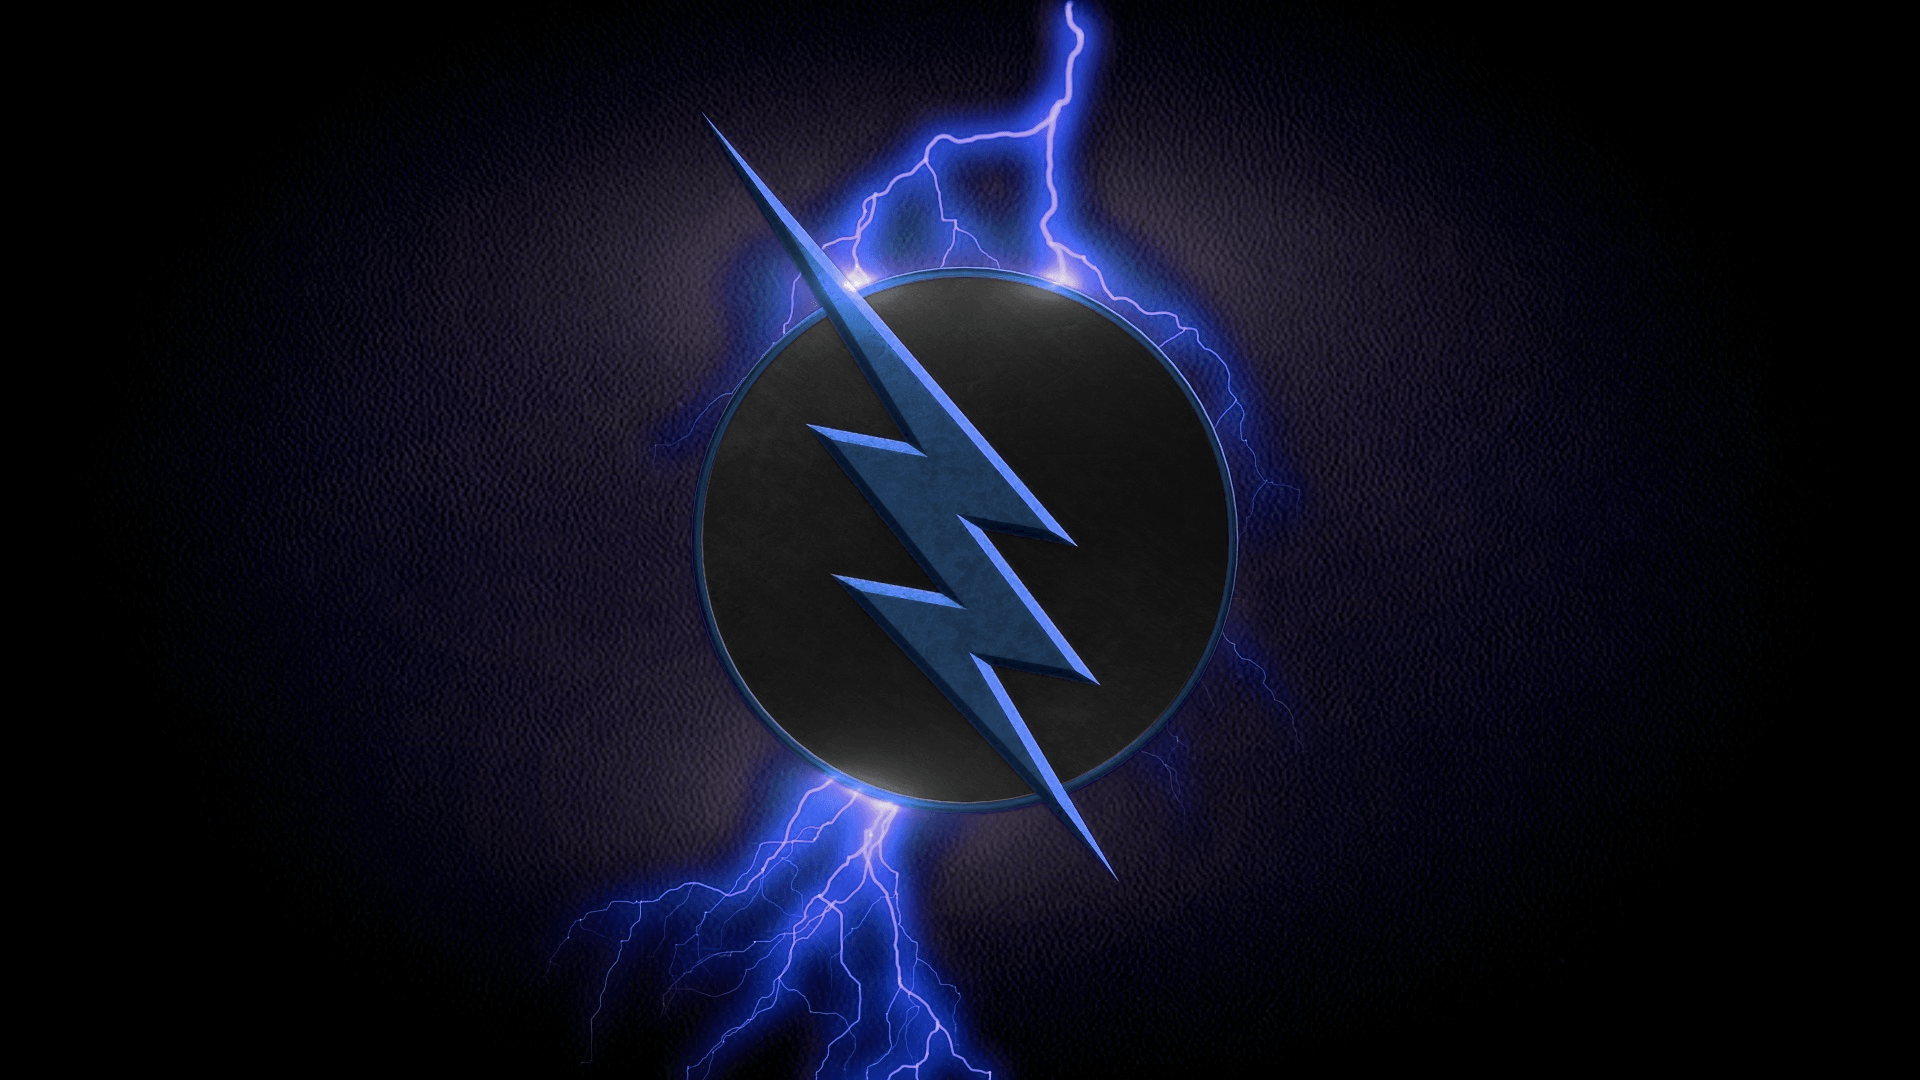 The Flash Symbol Wallpapers Group